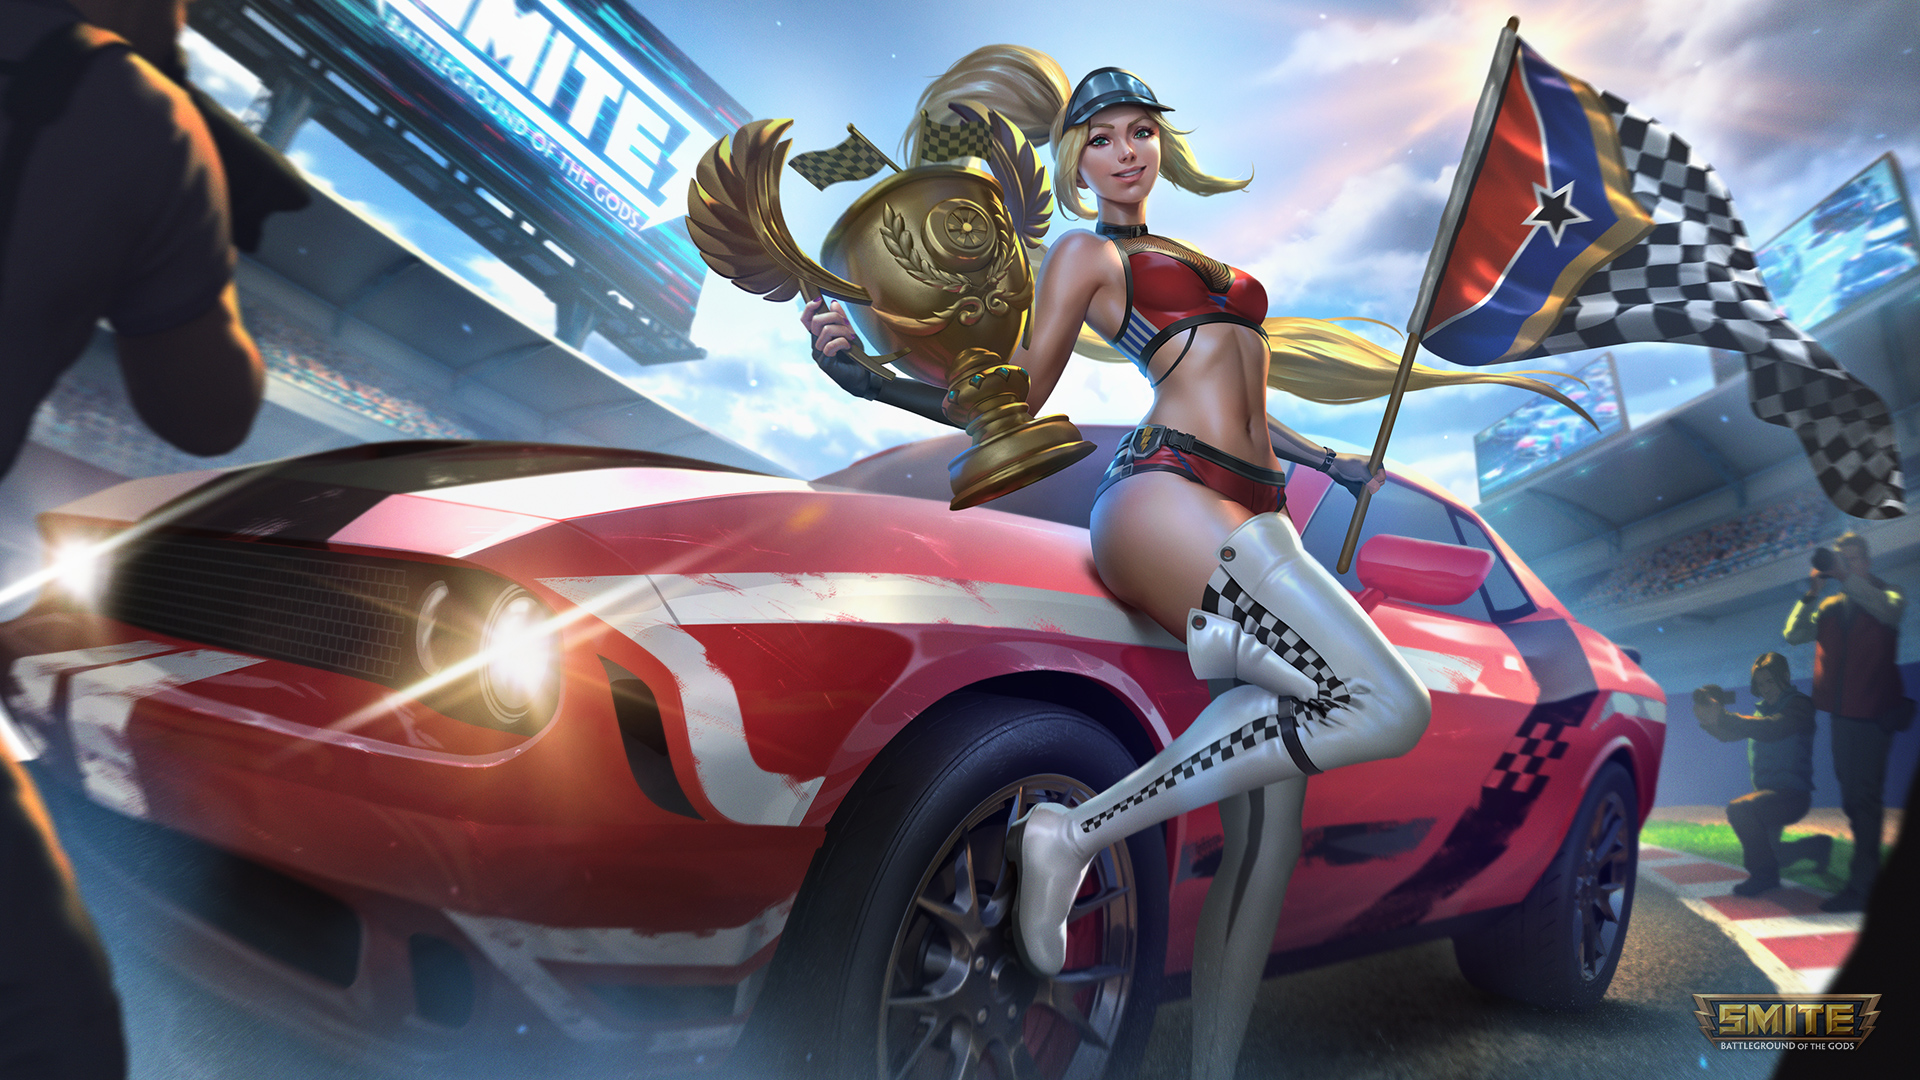 General 1920x1080 Smite MOBA Sol (Smite) video games video game characters women with cars video game art flag headlights frontal view thighs ponytail smiling sky clouds belly belly button looking at viewer camera blonde blue eyes hat video game girls race flag